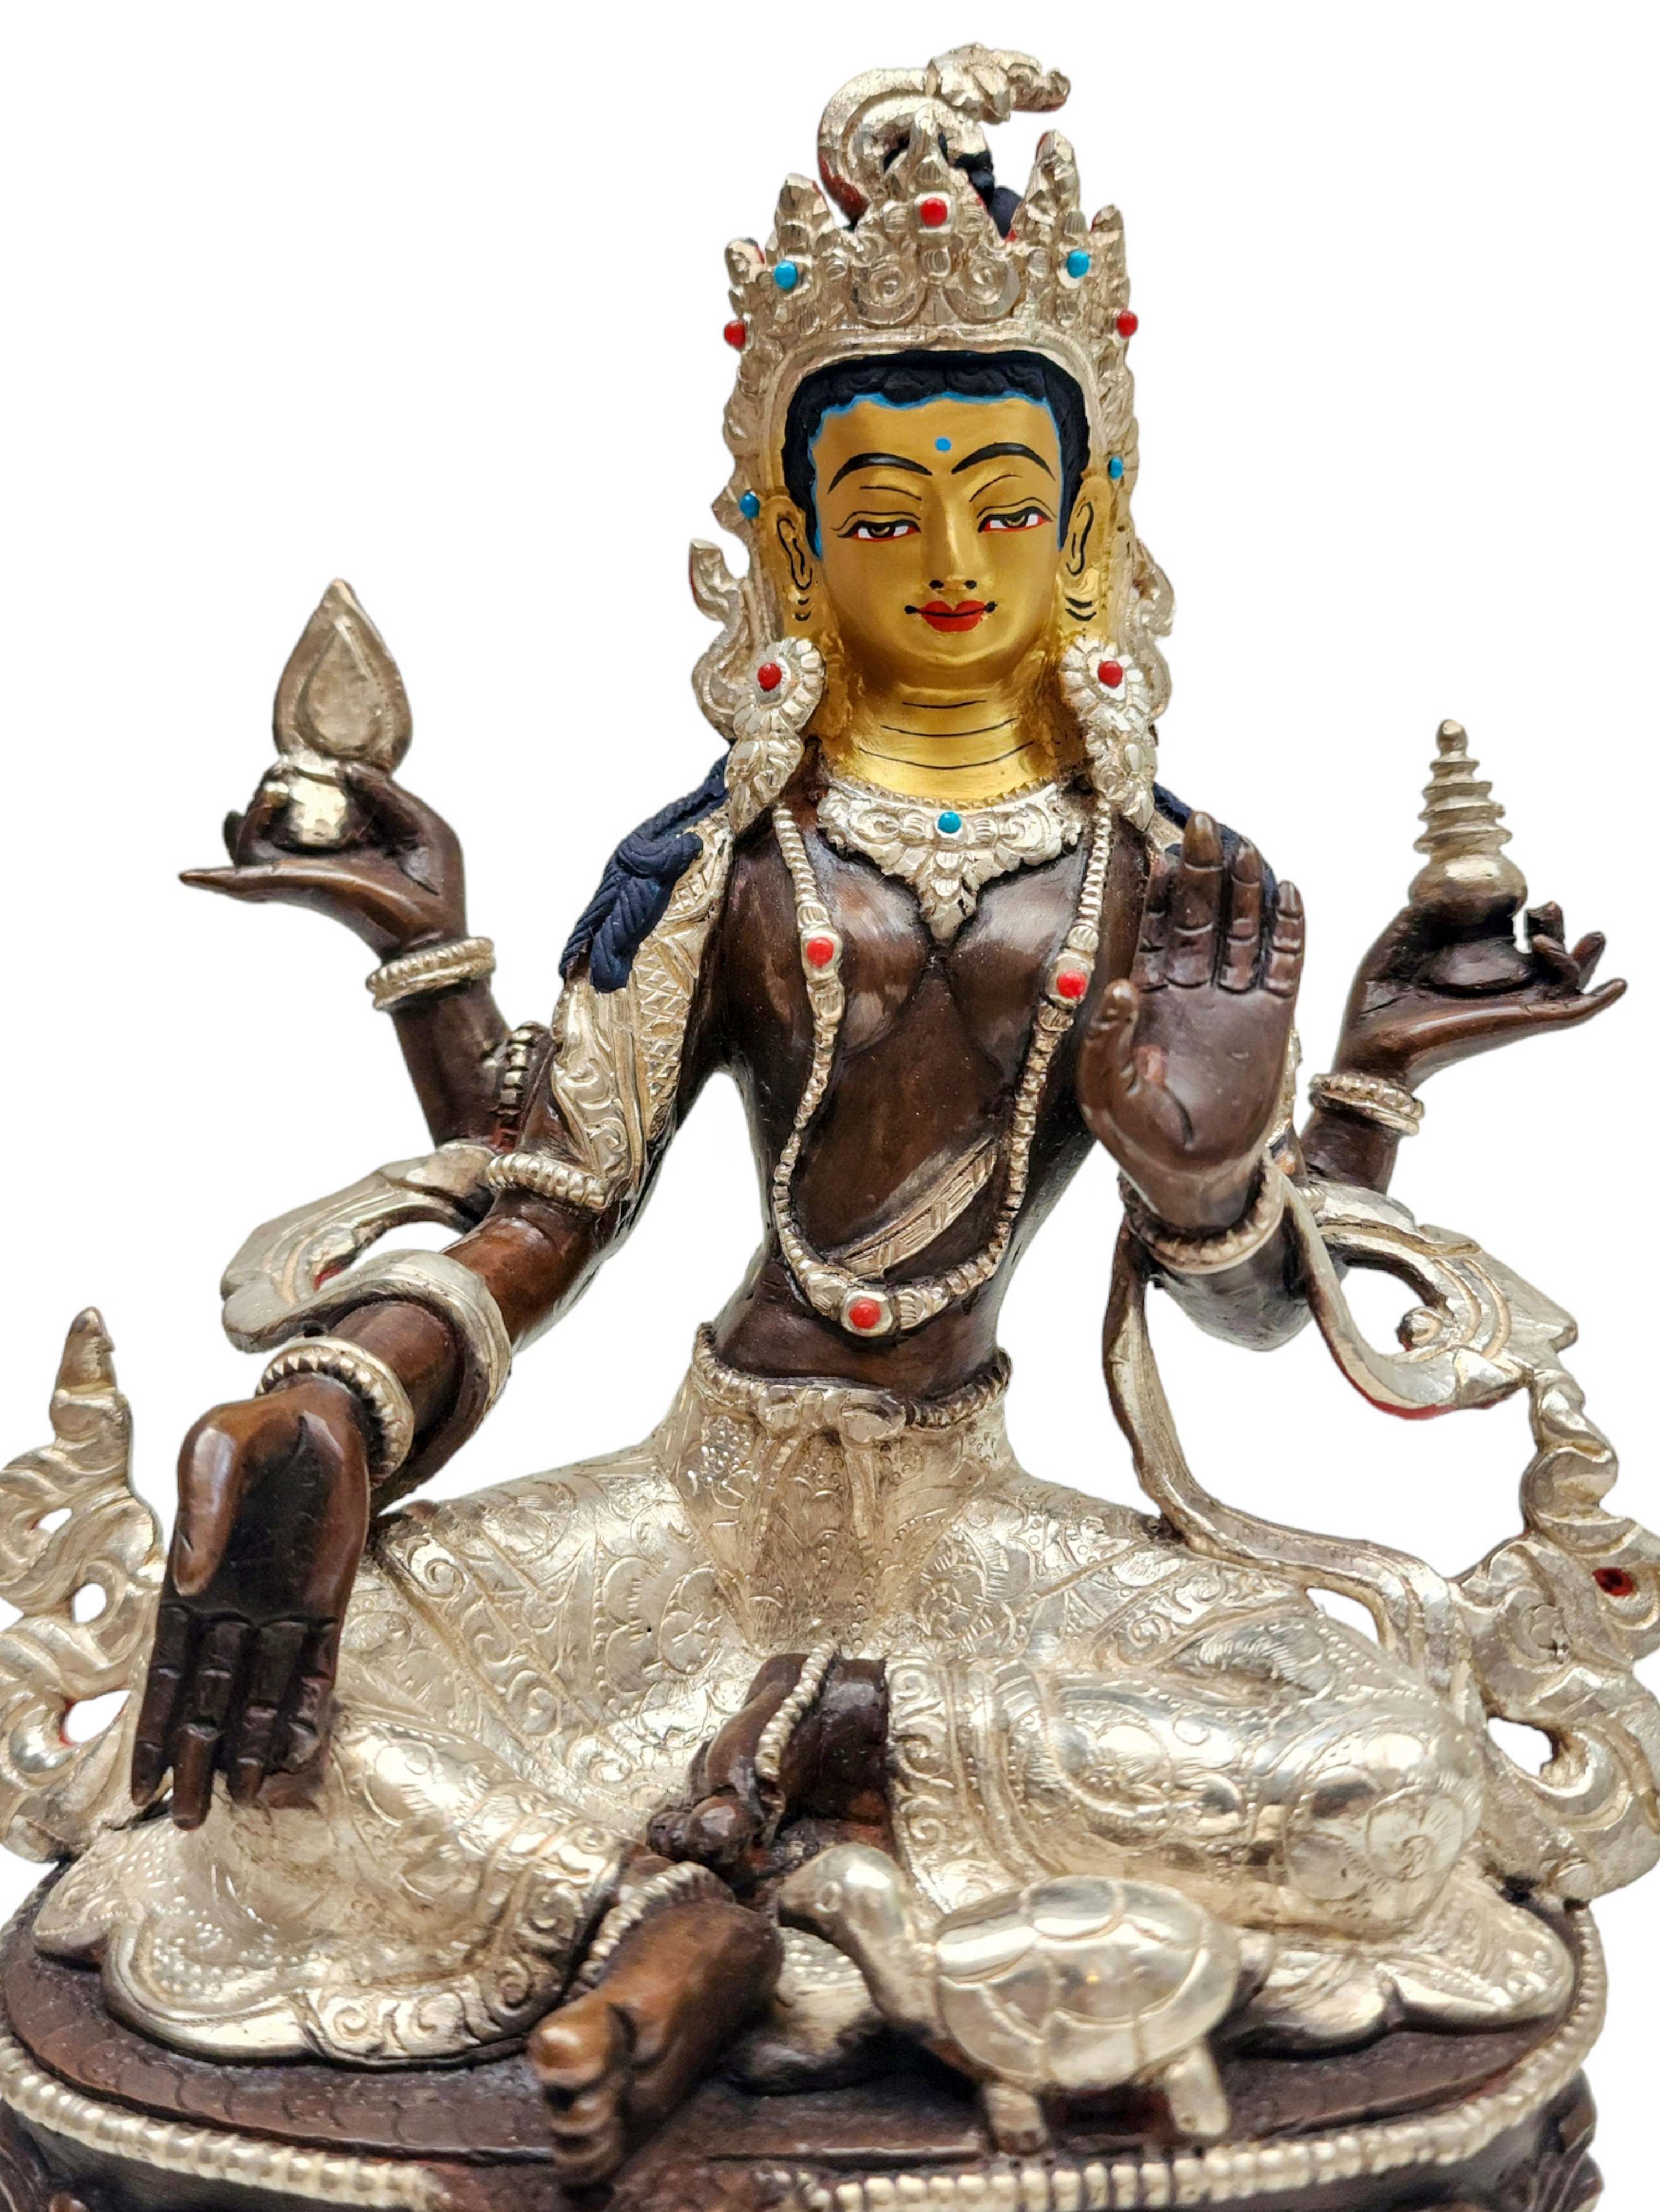 lakshmi Buddhist Handmade Statue, silver And Chocolate Oxidized, Wtih face Painted